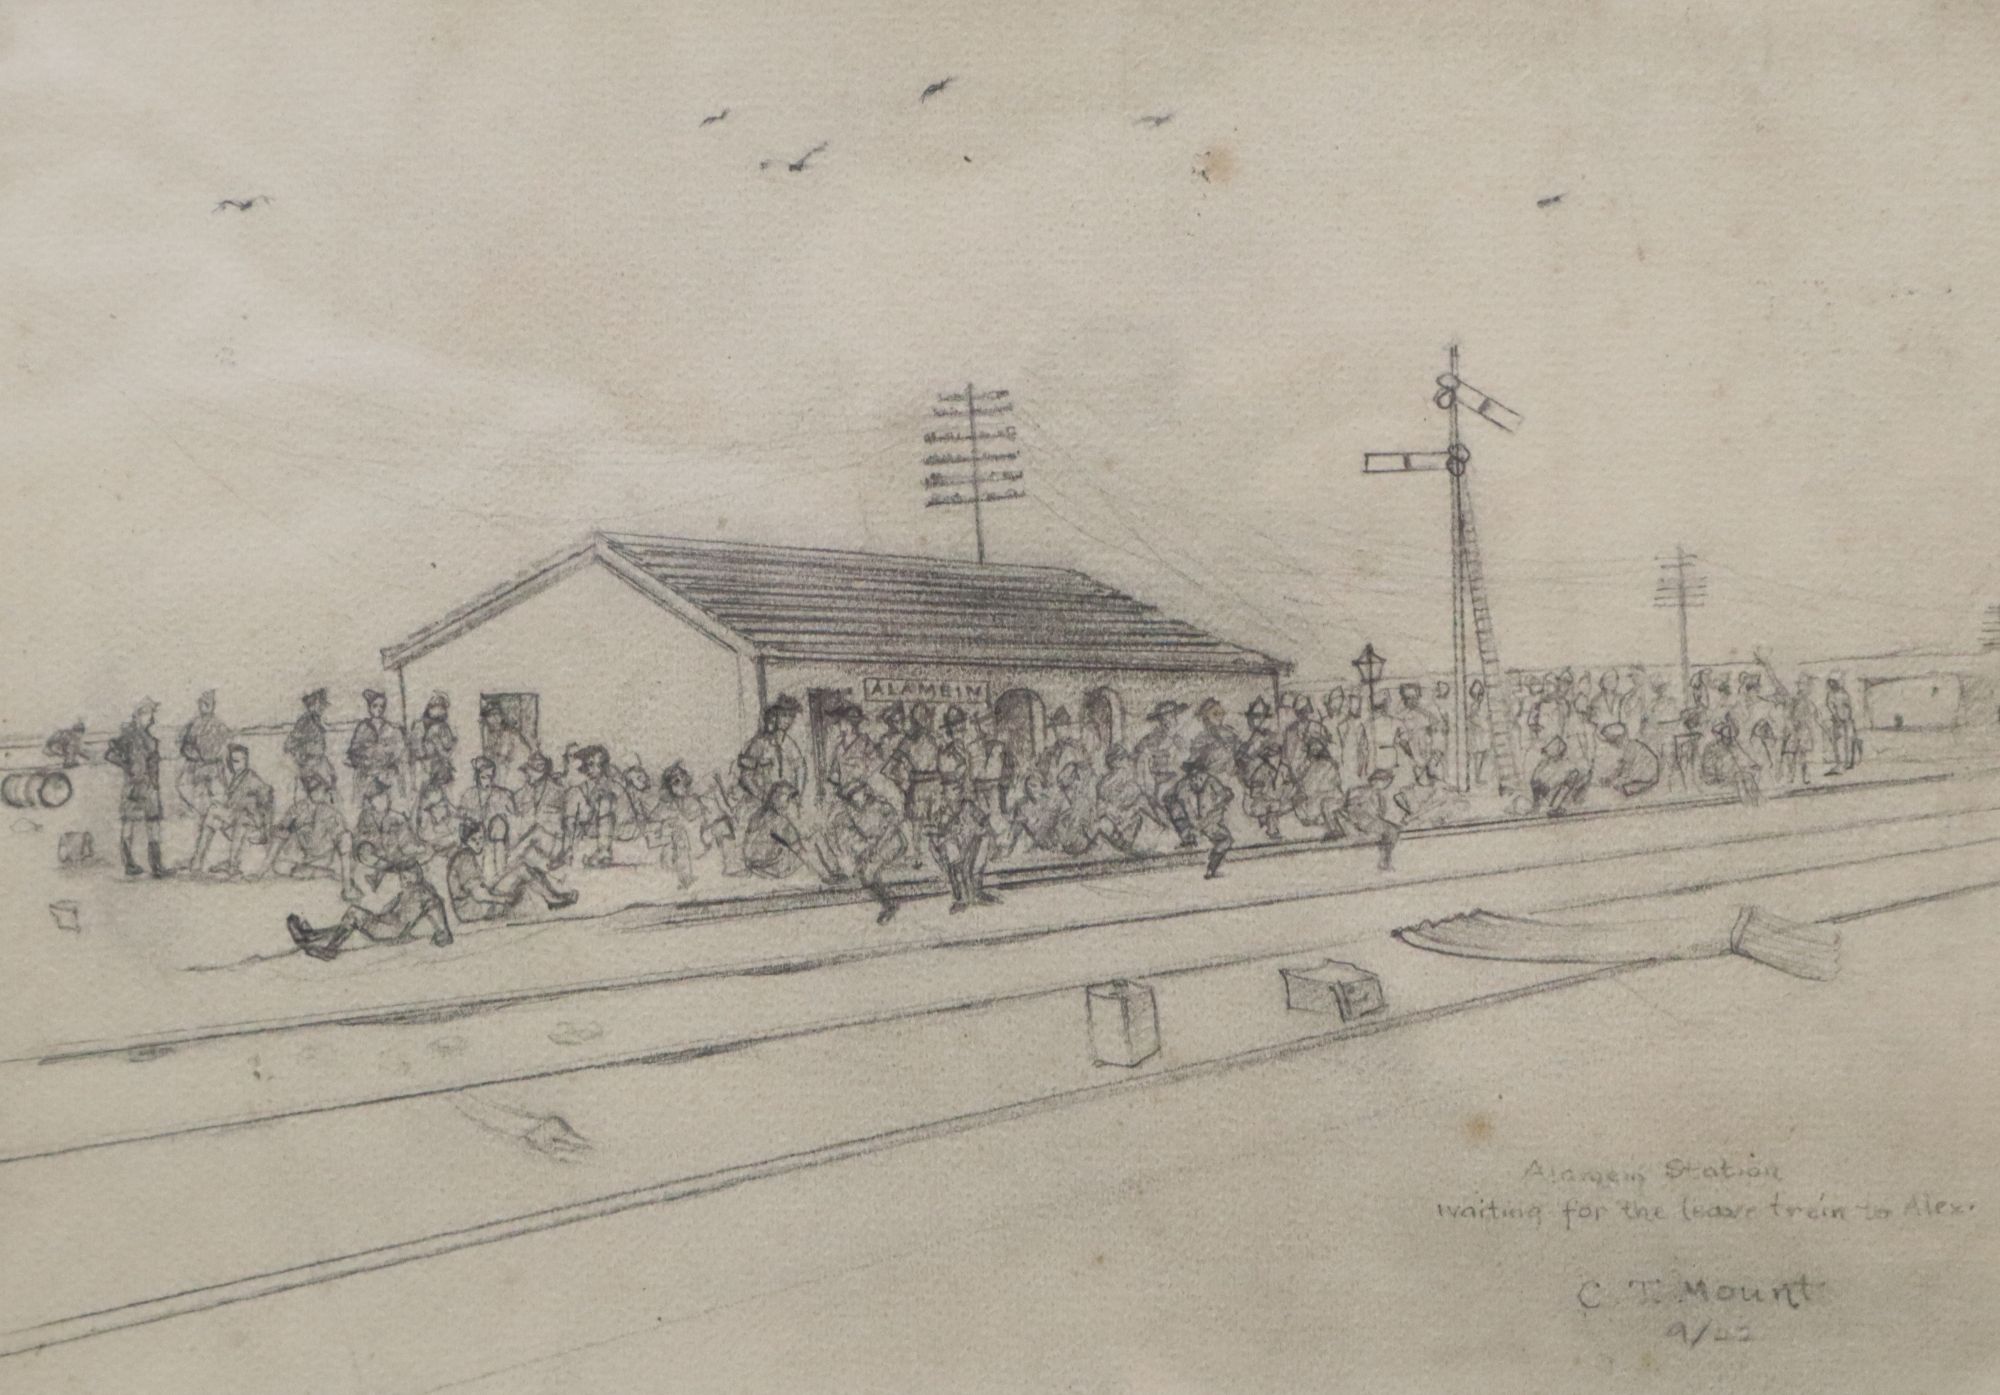 Cyril Mount (1920-2013), two drawings, Stuka raid on battery position, Alamein, 9/42 and Alamein Station, Waiting for the Leave Train t